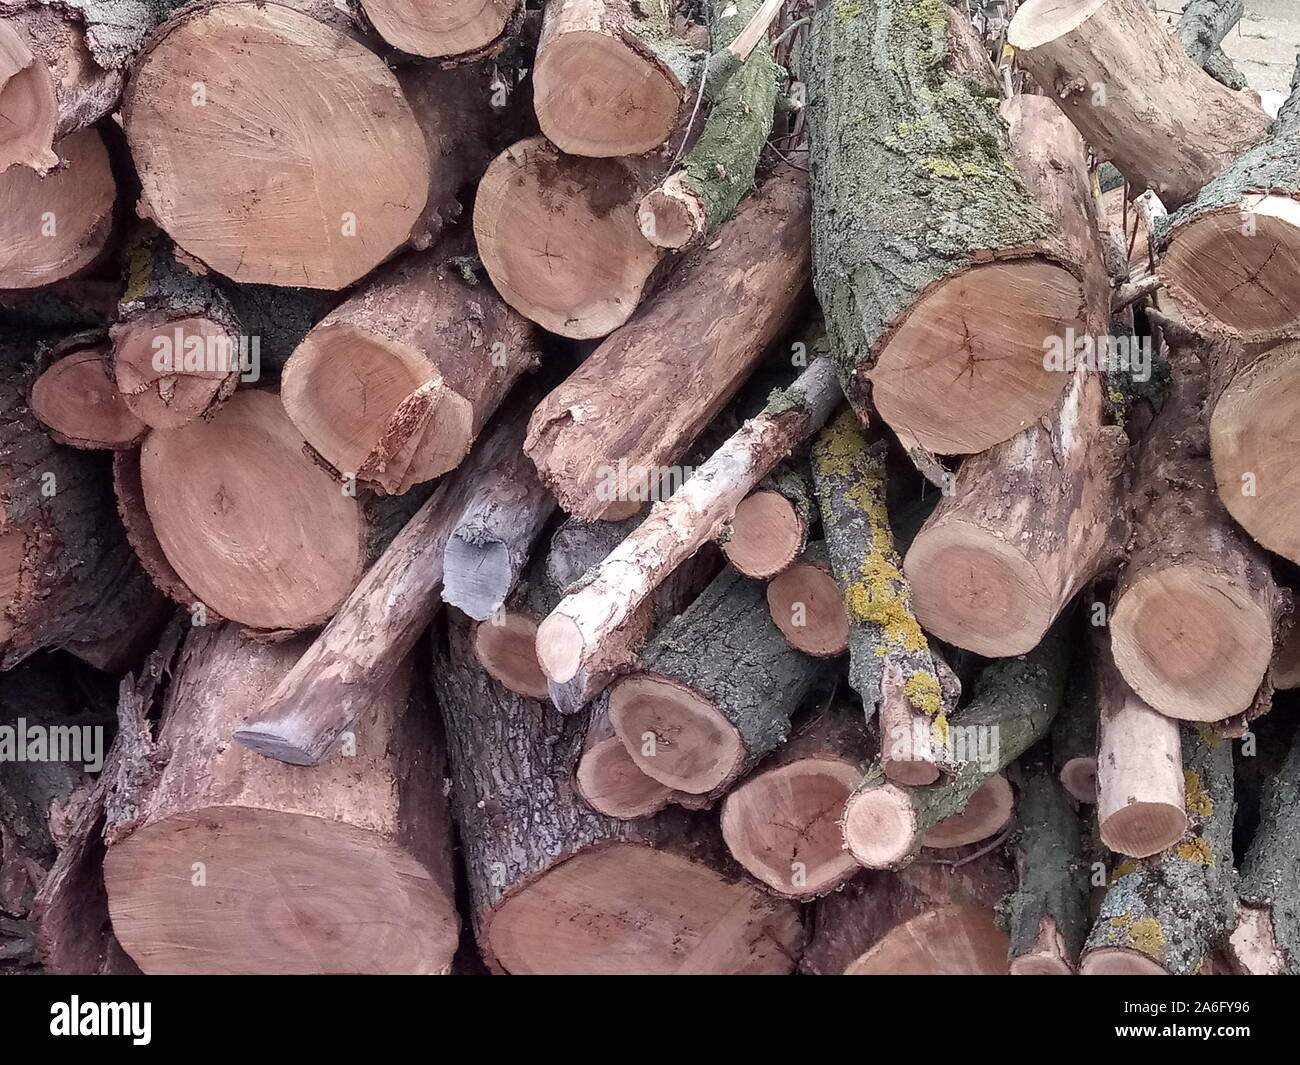 Forestry, view of sawn and stacked tree trunks Stock Photo